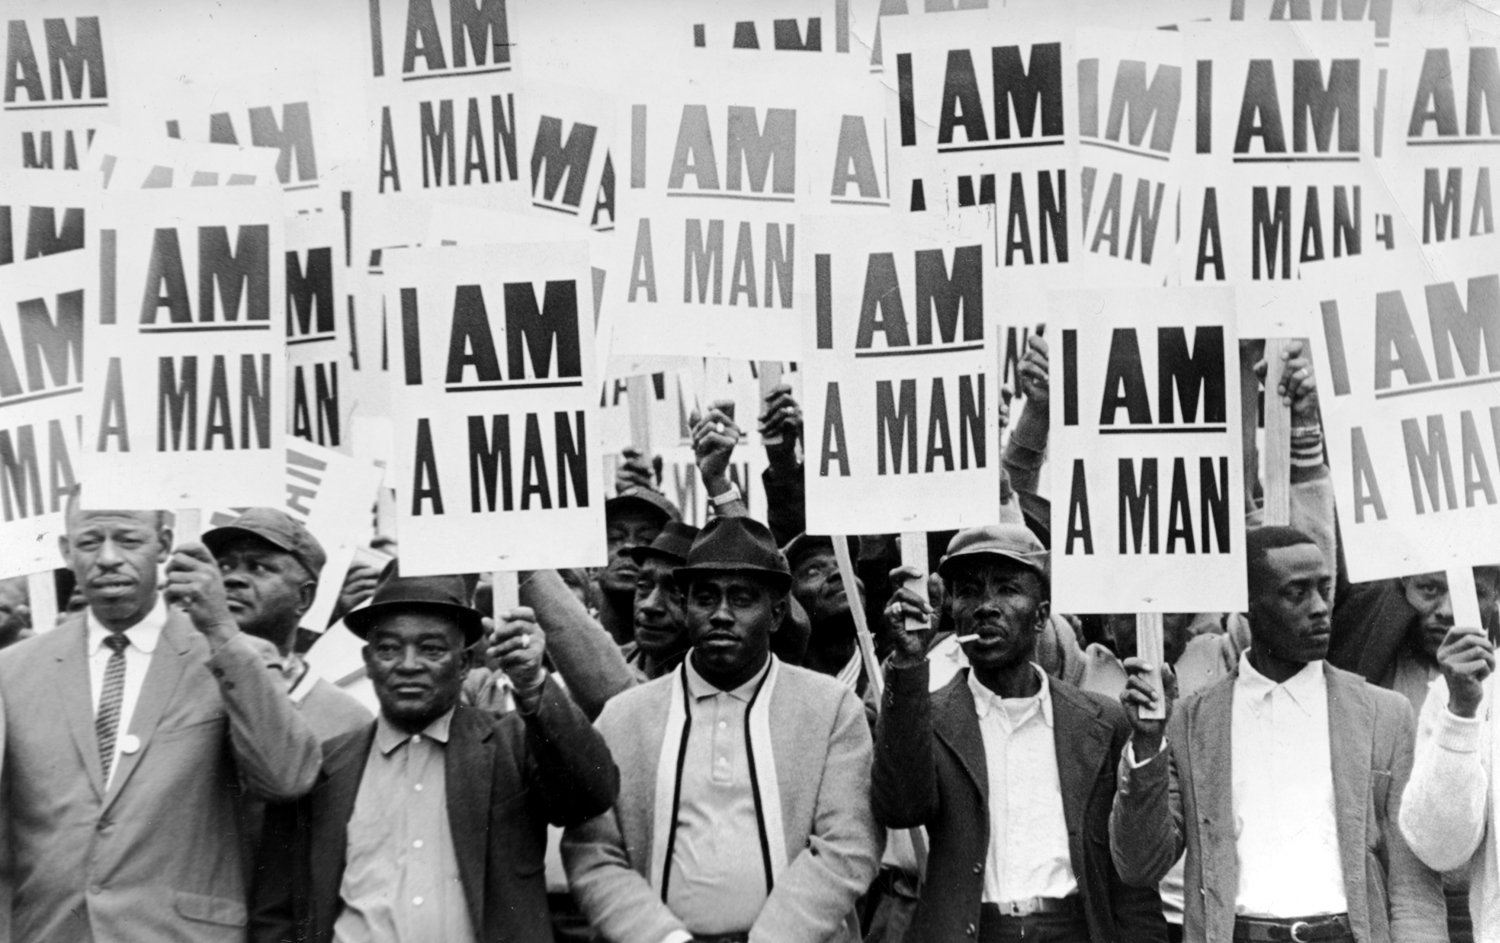 Striking sanitation workers holding signs reading "I am a man"